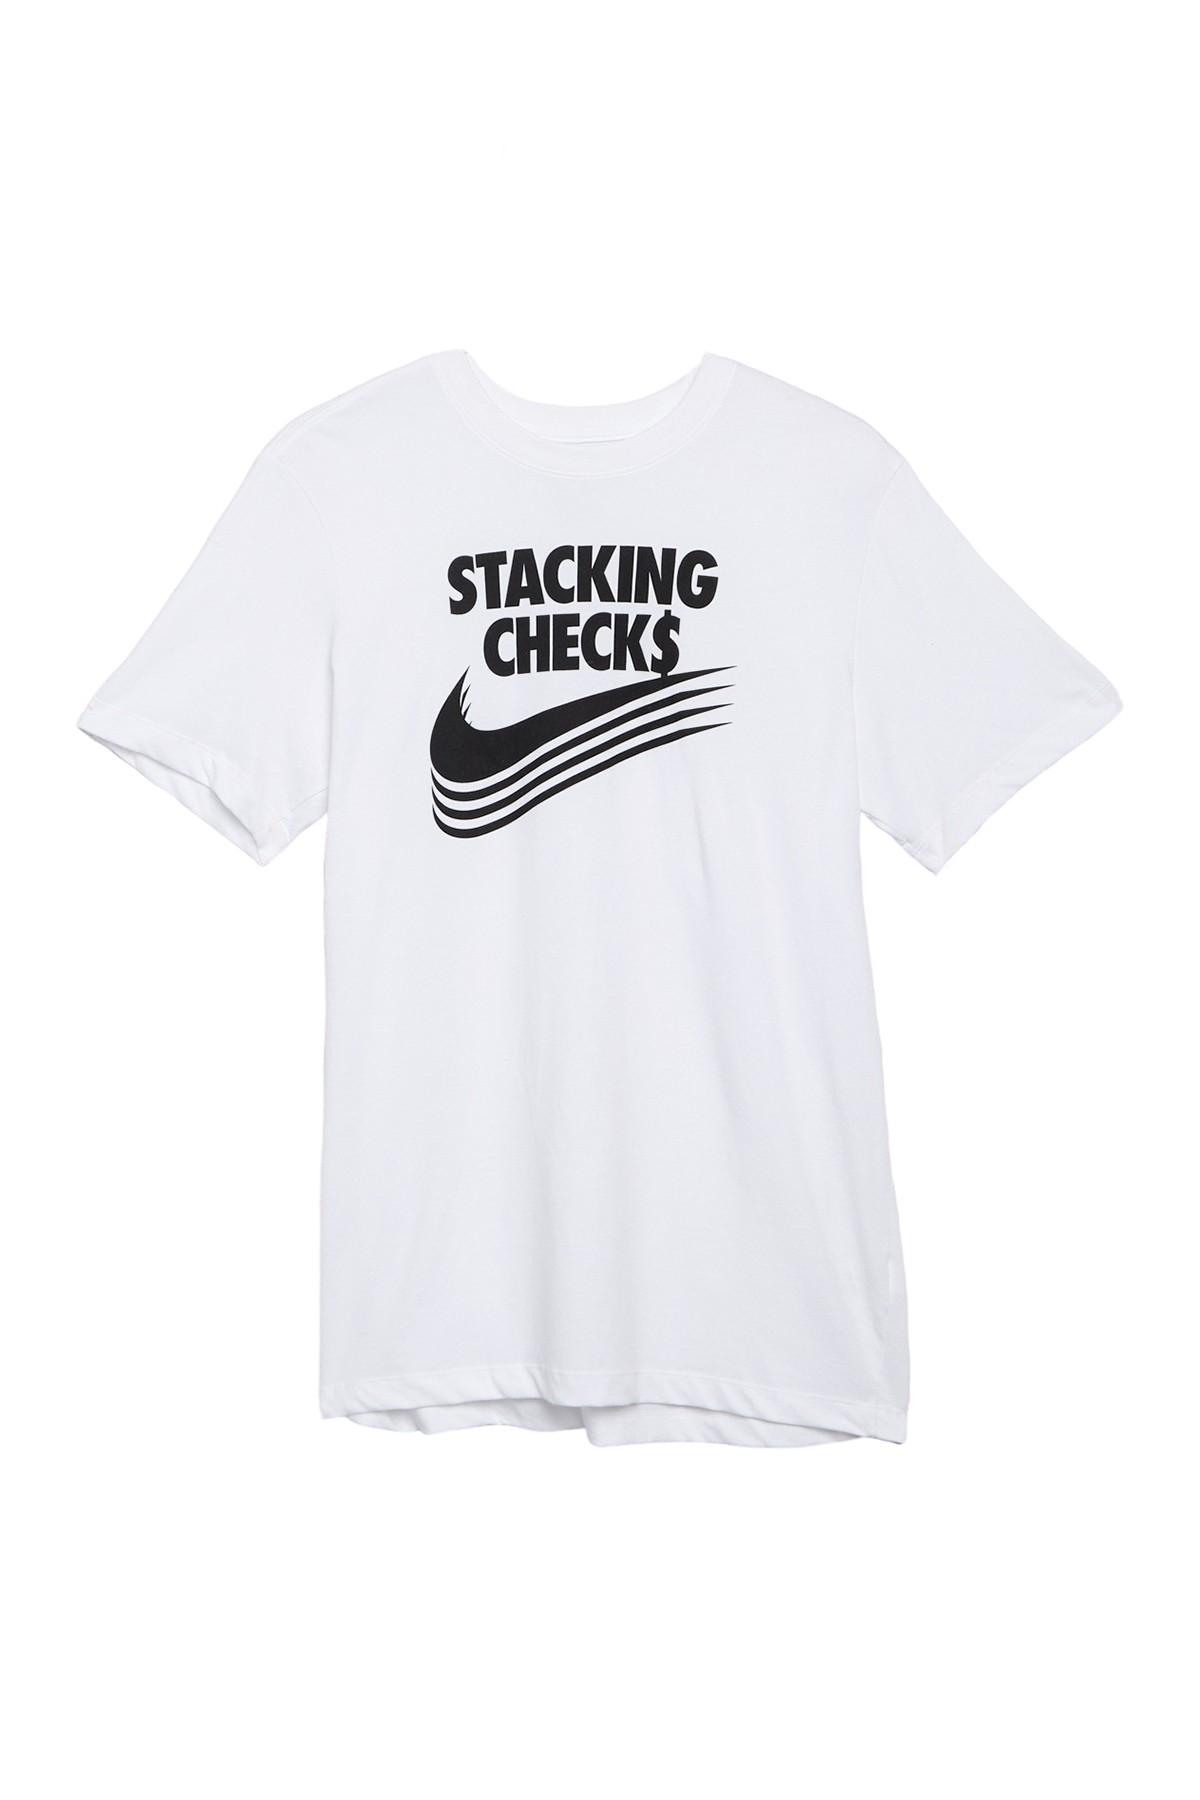 Nike Stacking T-shirt in White for Men Lyst